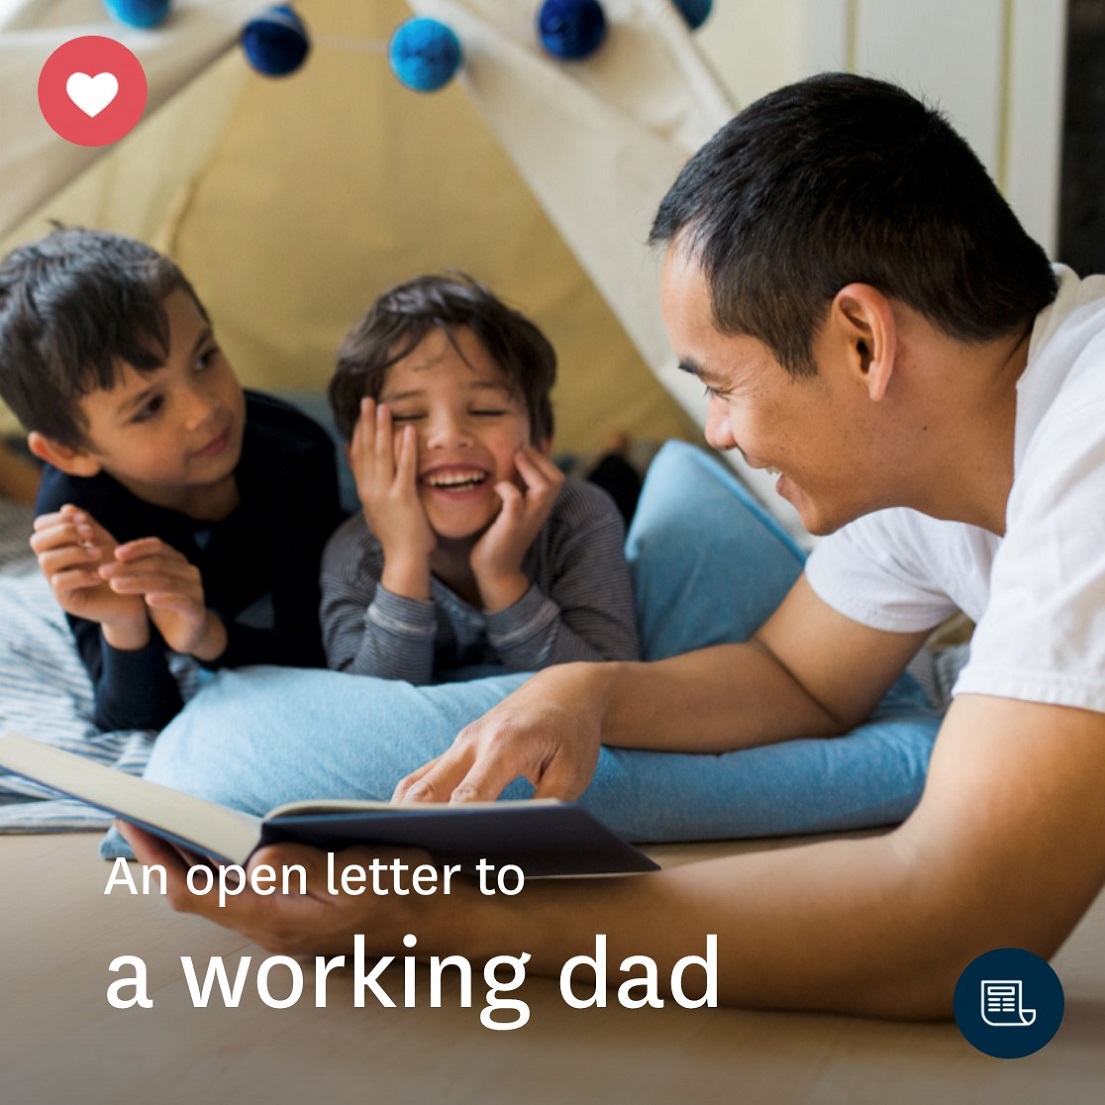 An open letter to a working dad